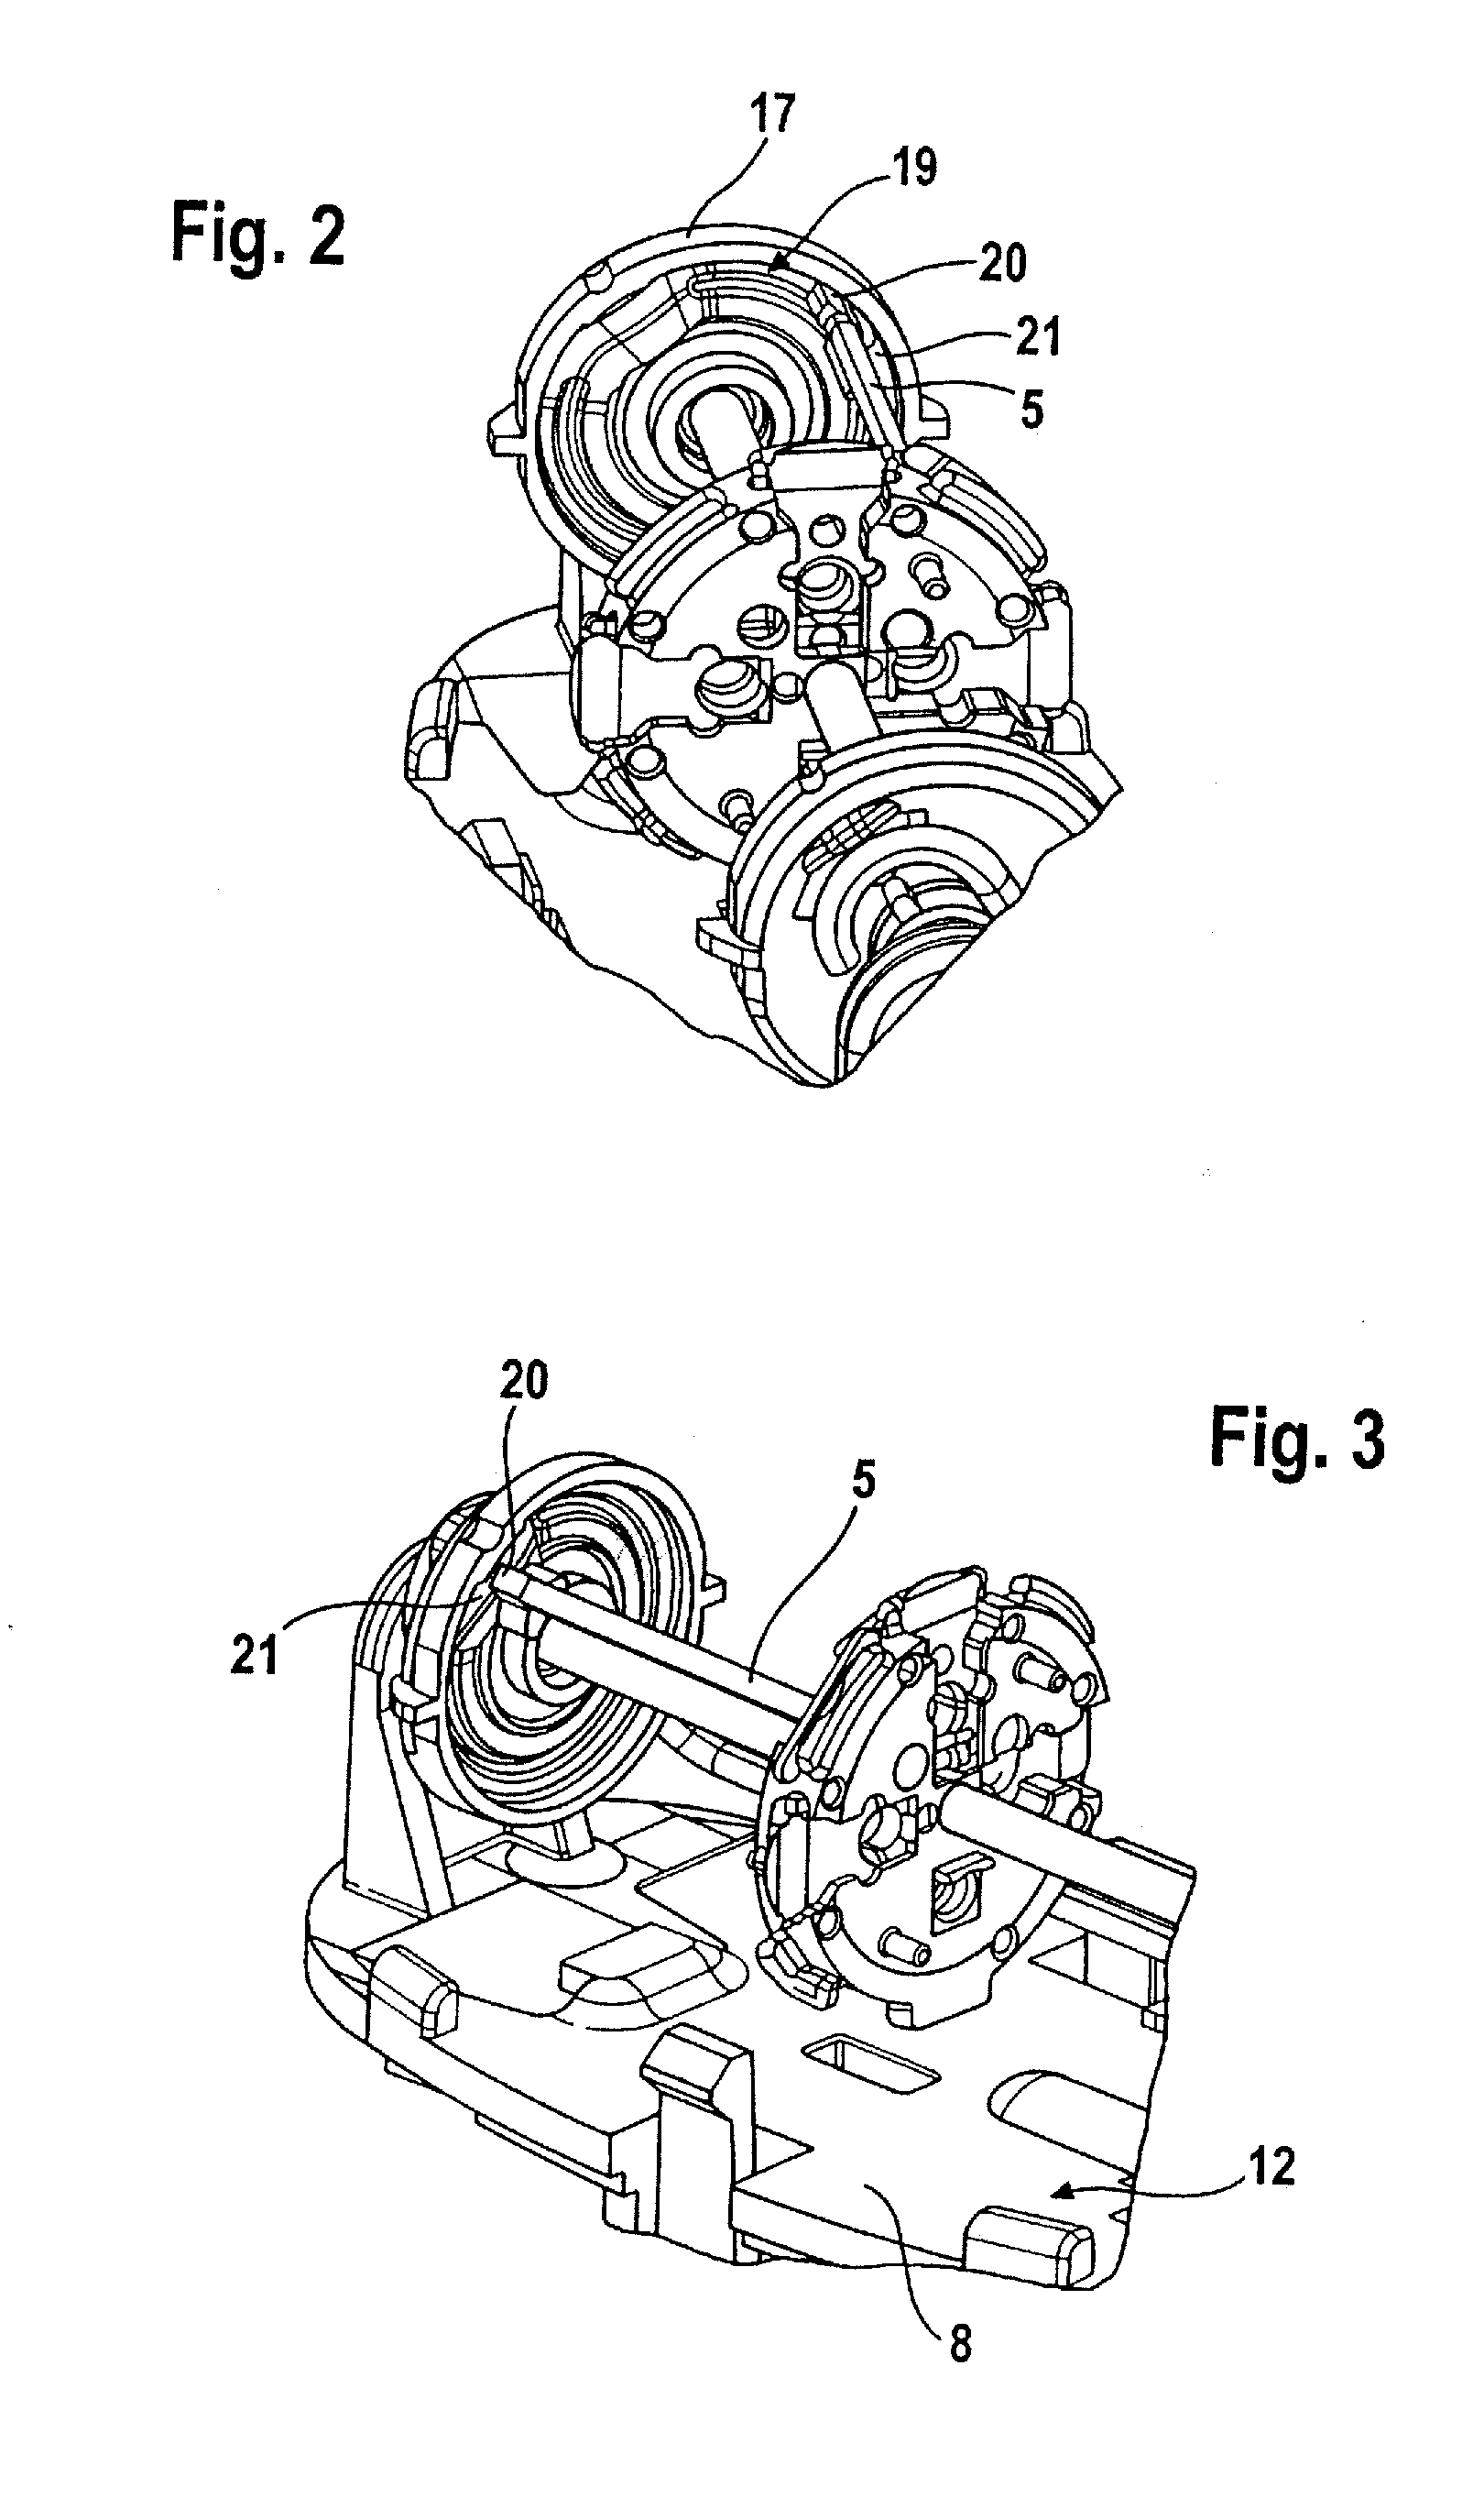 Washable Personal Grooming Device, in Particular Hair Removal Device, and Method for the Production of Components of Such a Device